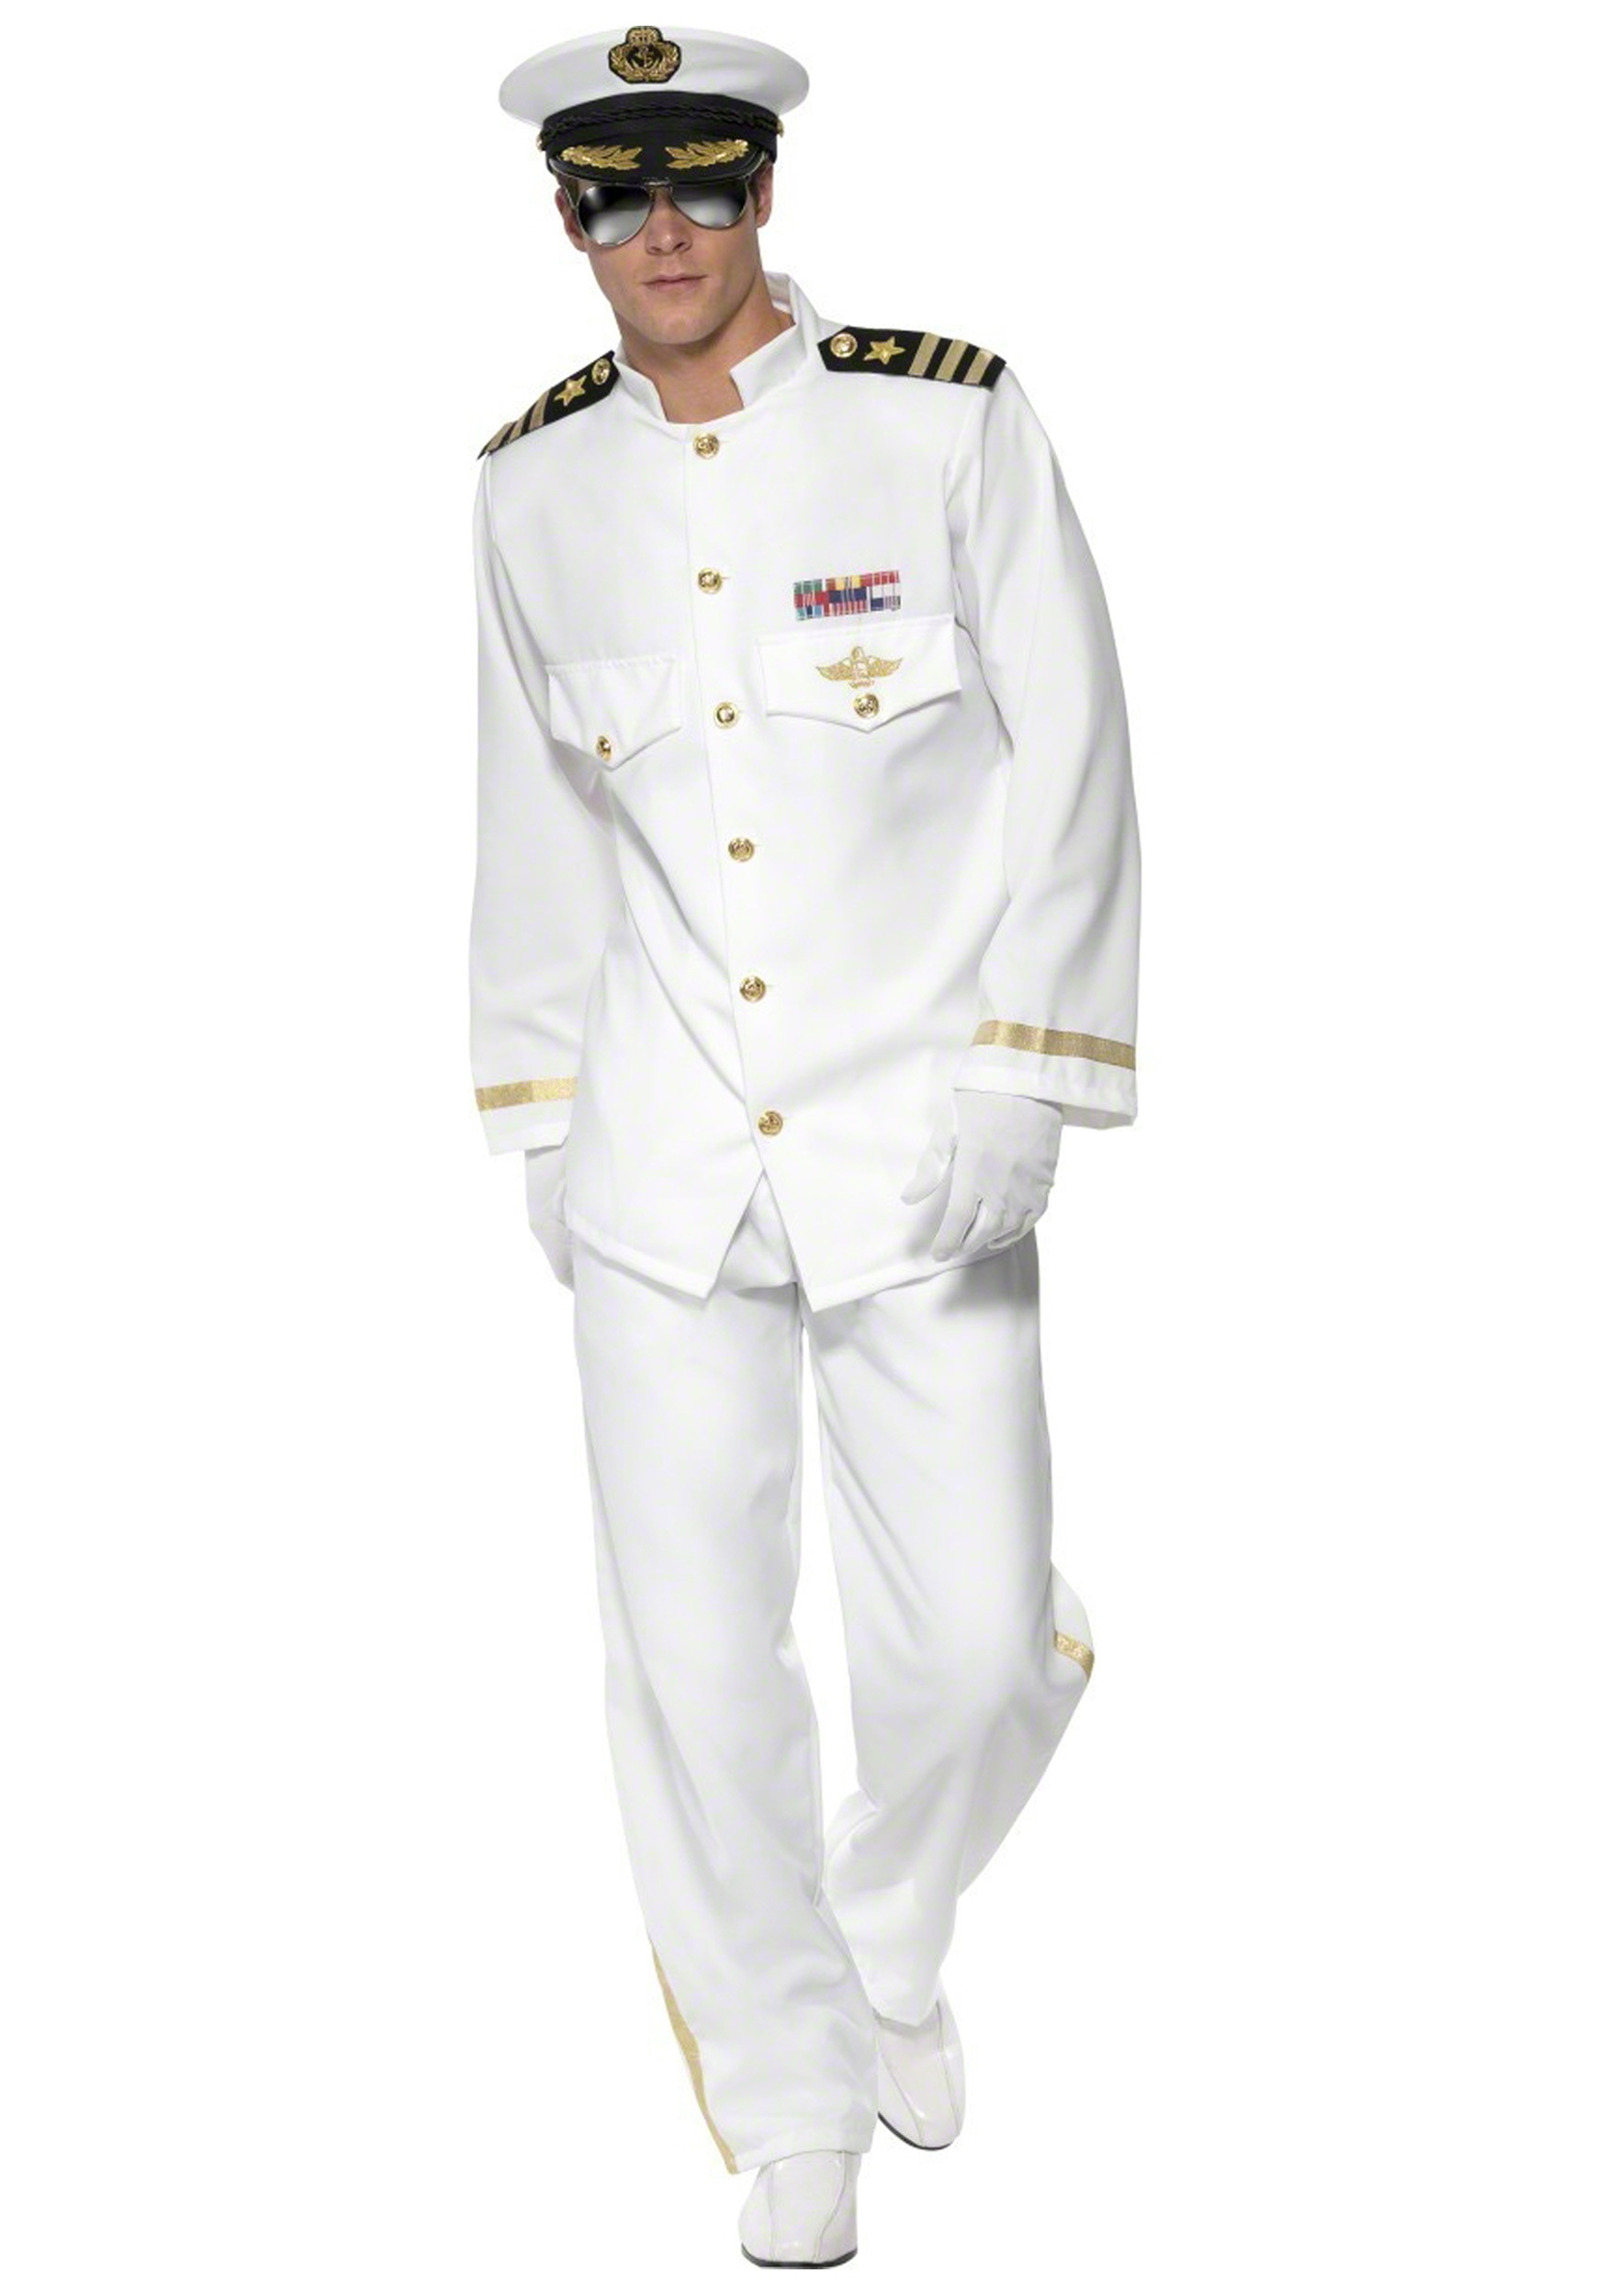 Image of Mens Deluxe Captain Costume ID SM33690-L